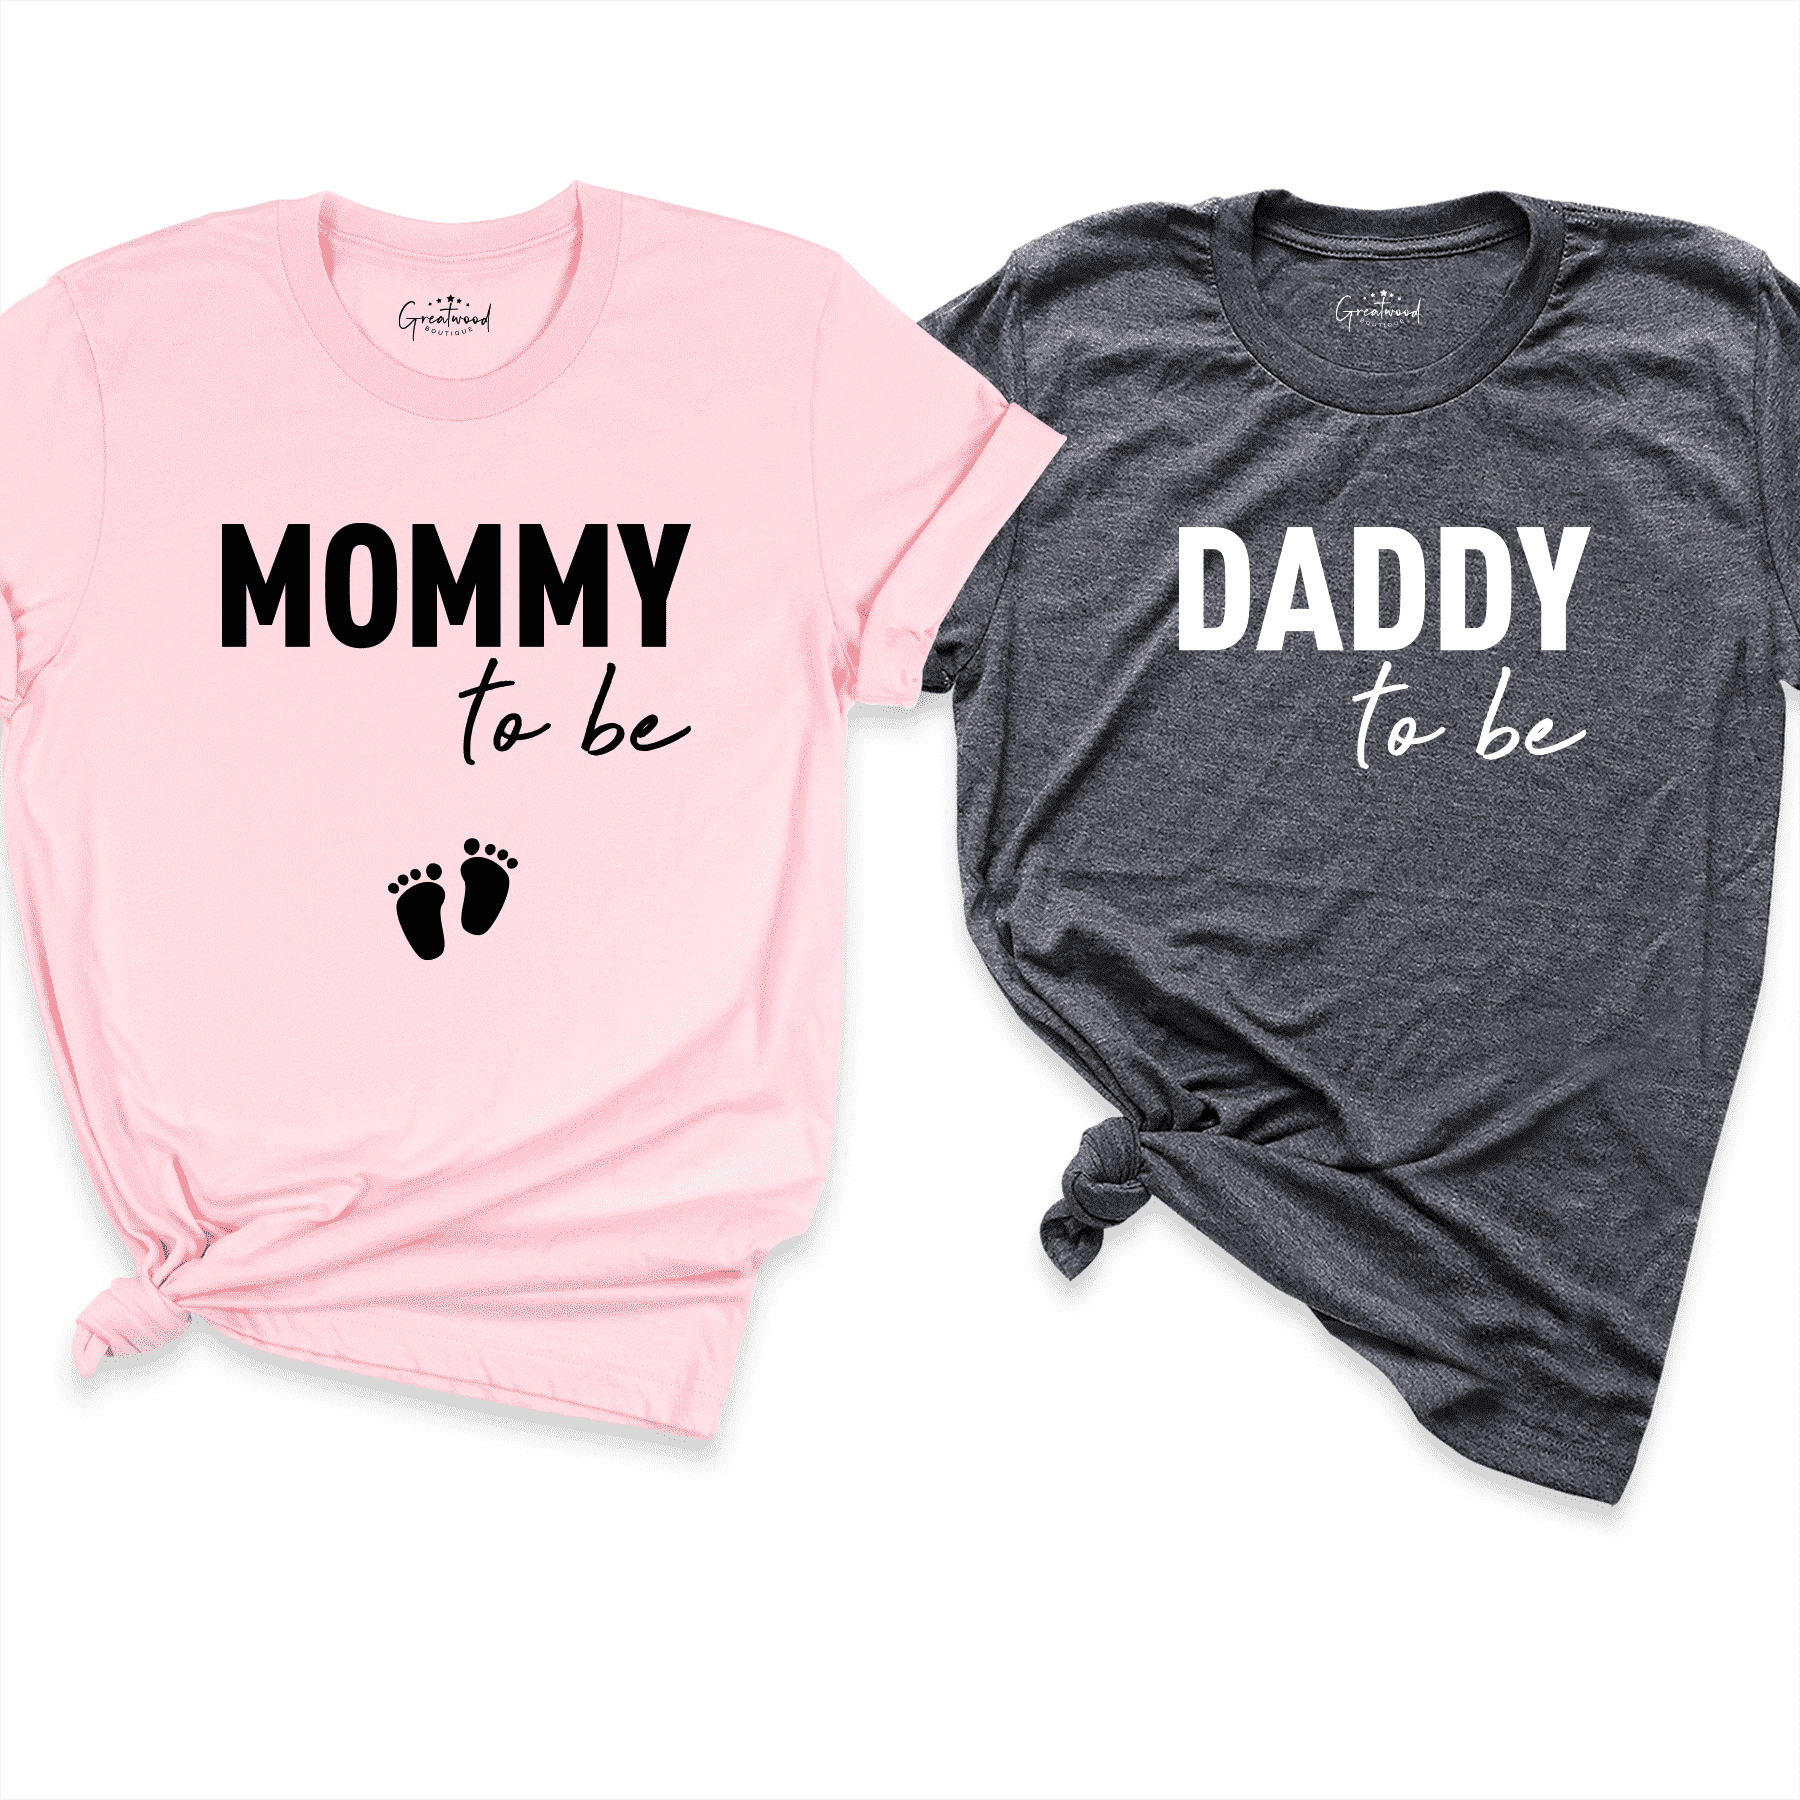 Dadd & Mommy To Be Shirt Pink - Greatwood Boutique